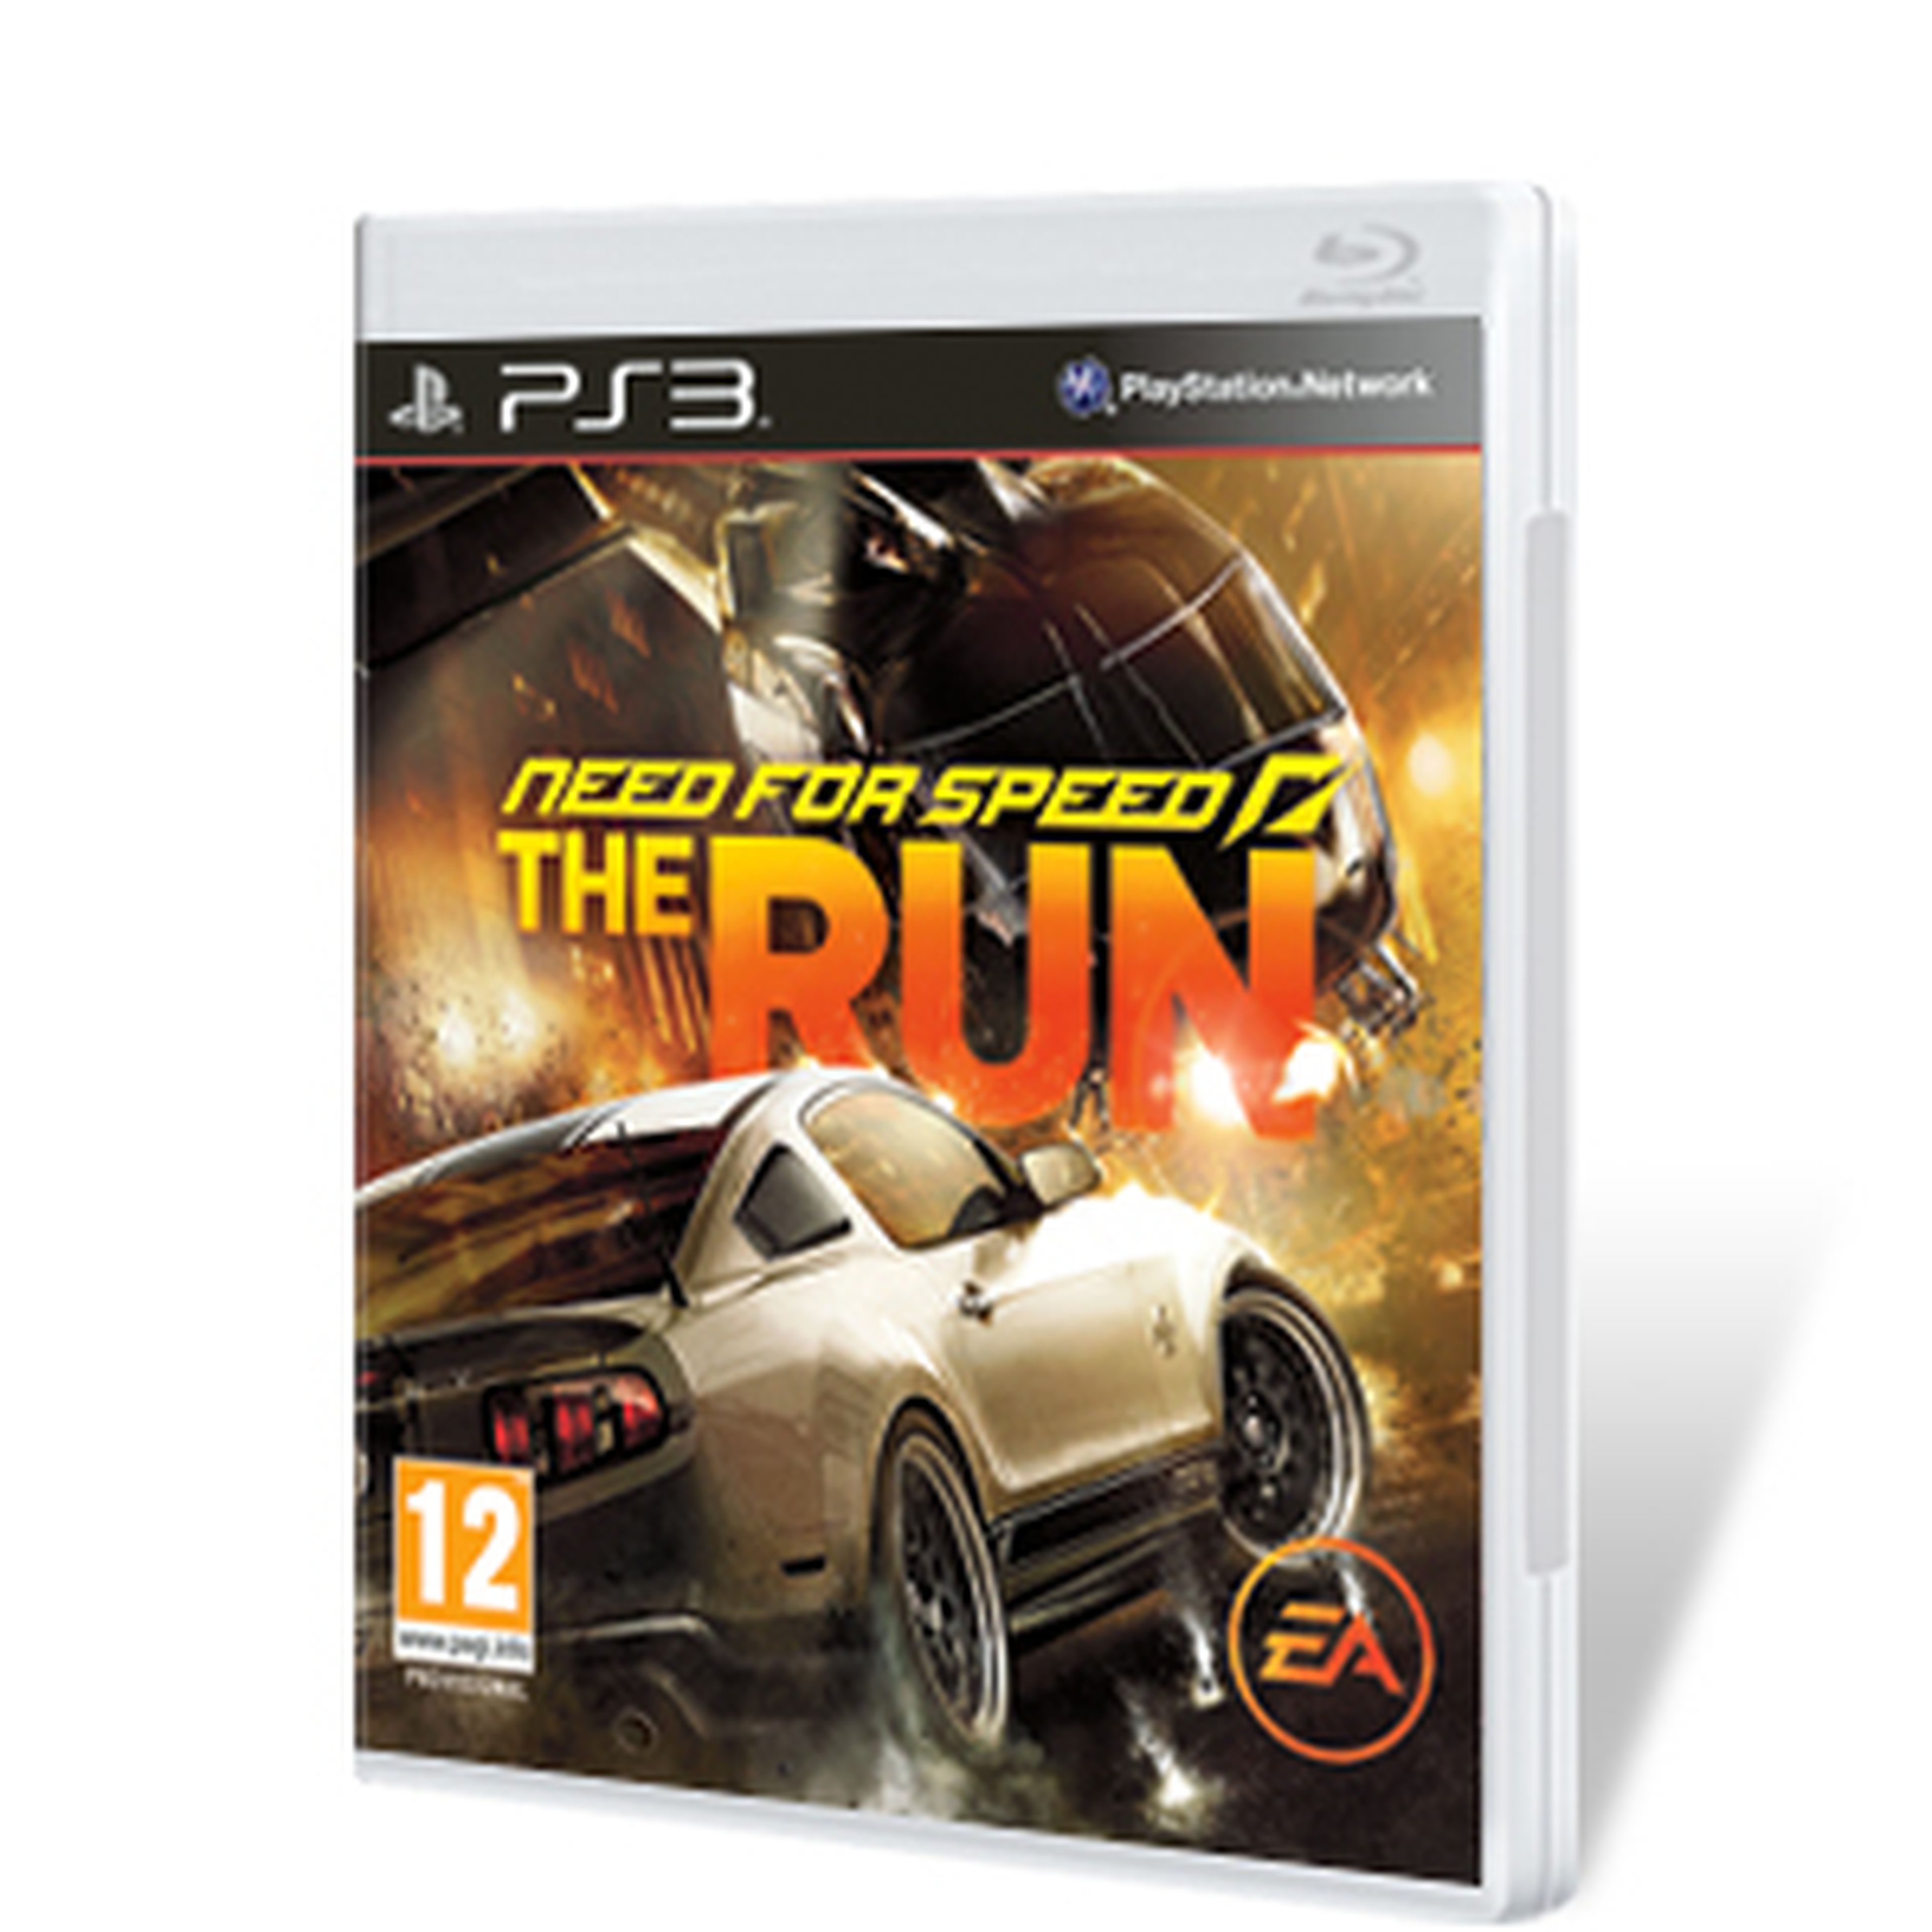 Need for Speed The Run para PS3